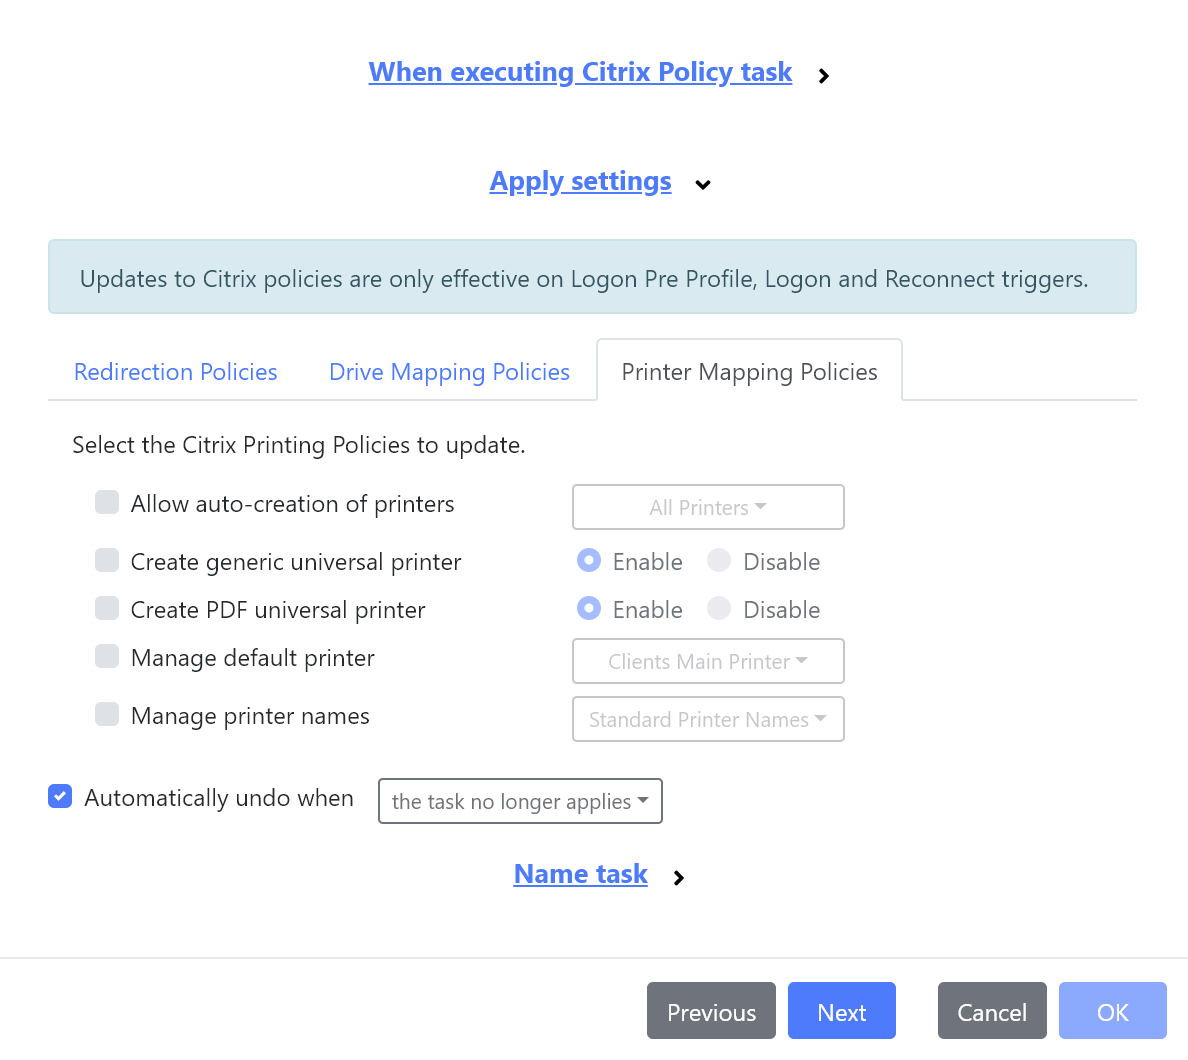 Managing Printer Mapping Policies with the Citrix Policy task